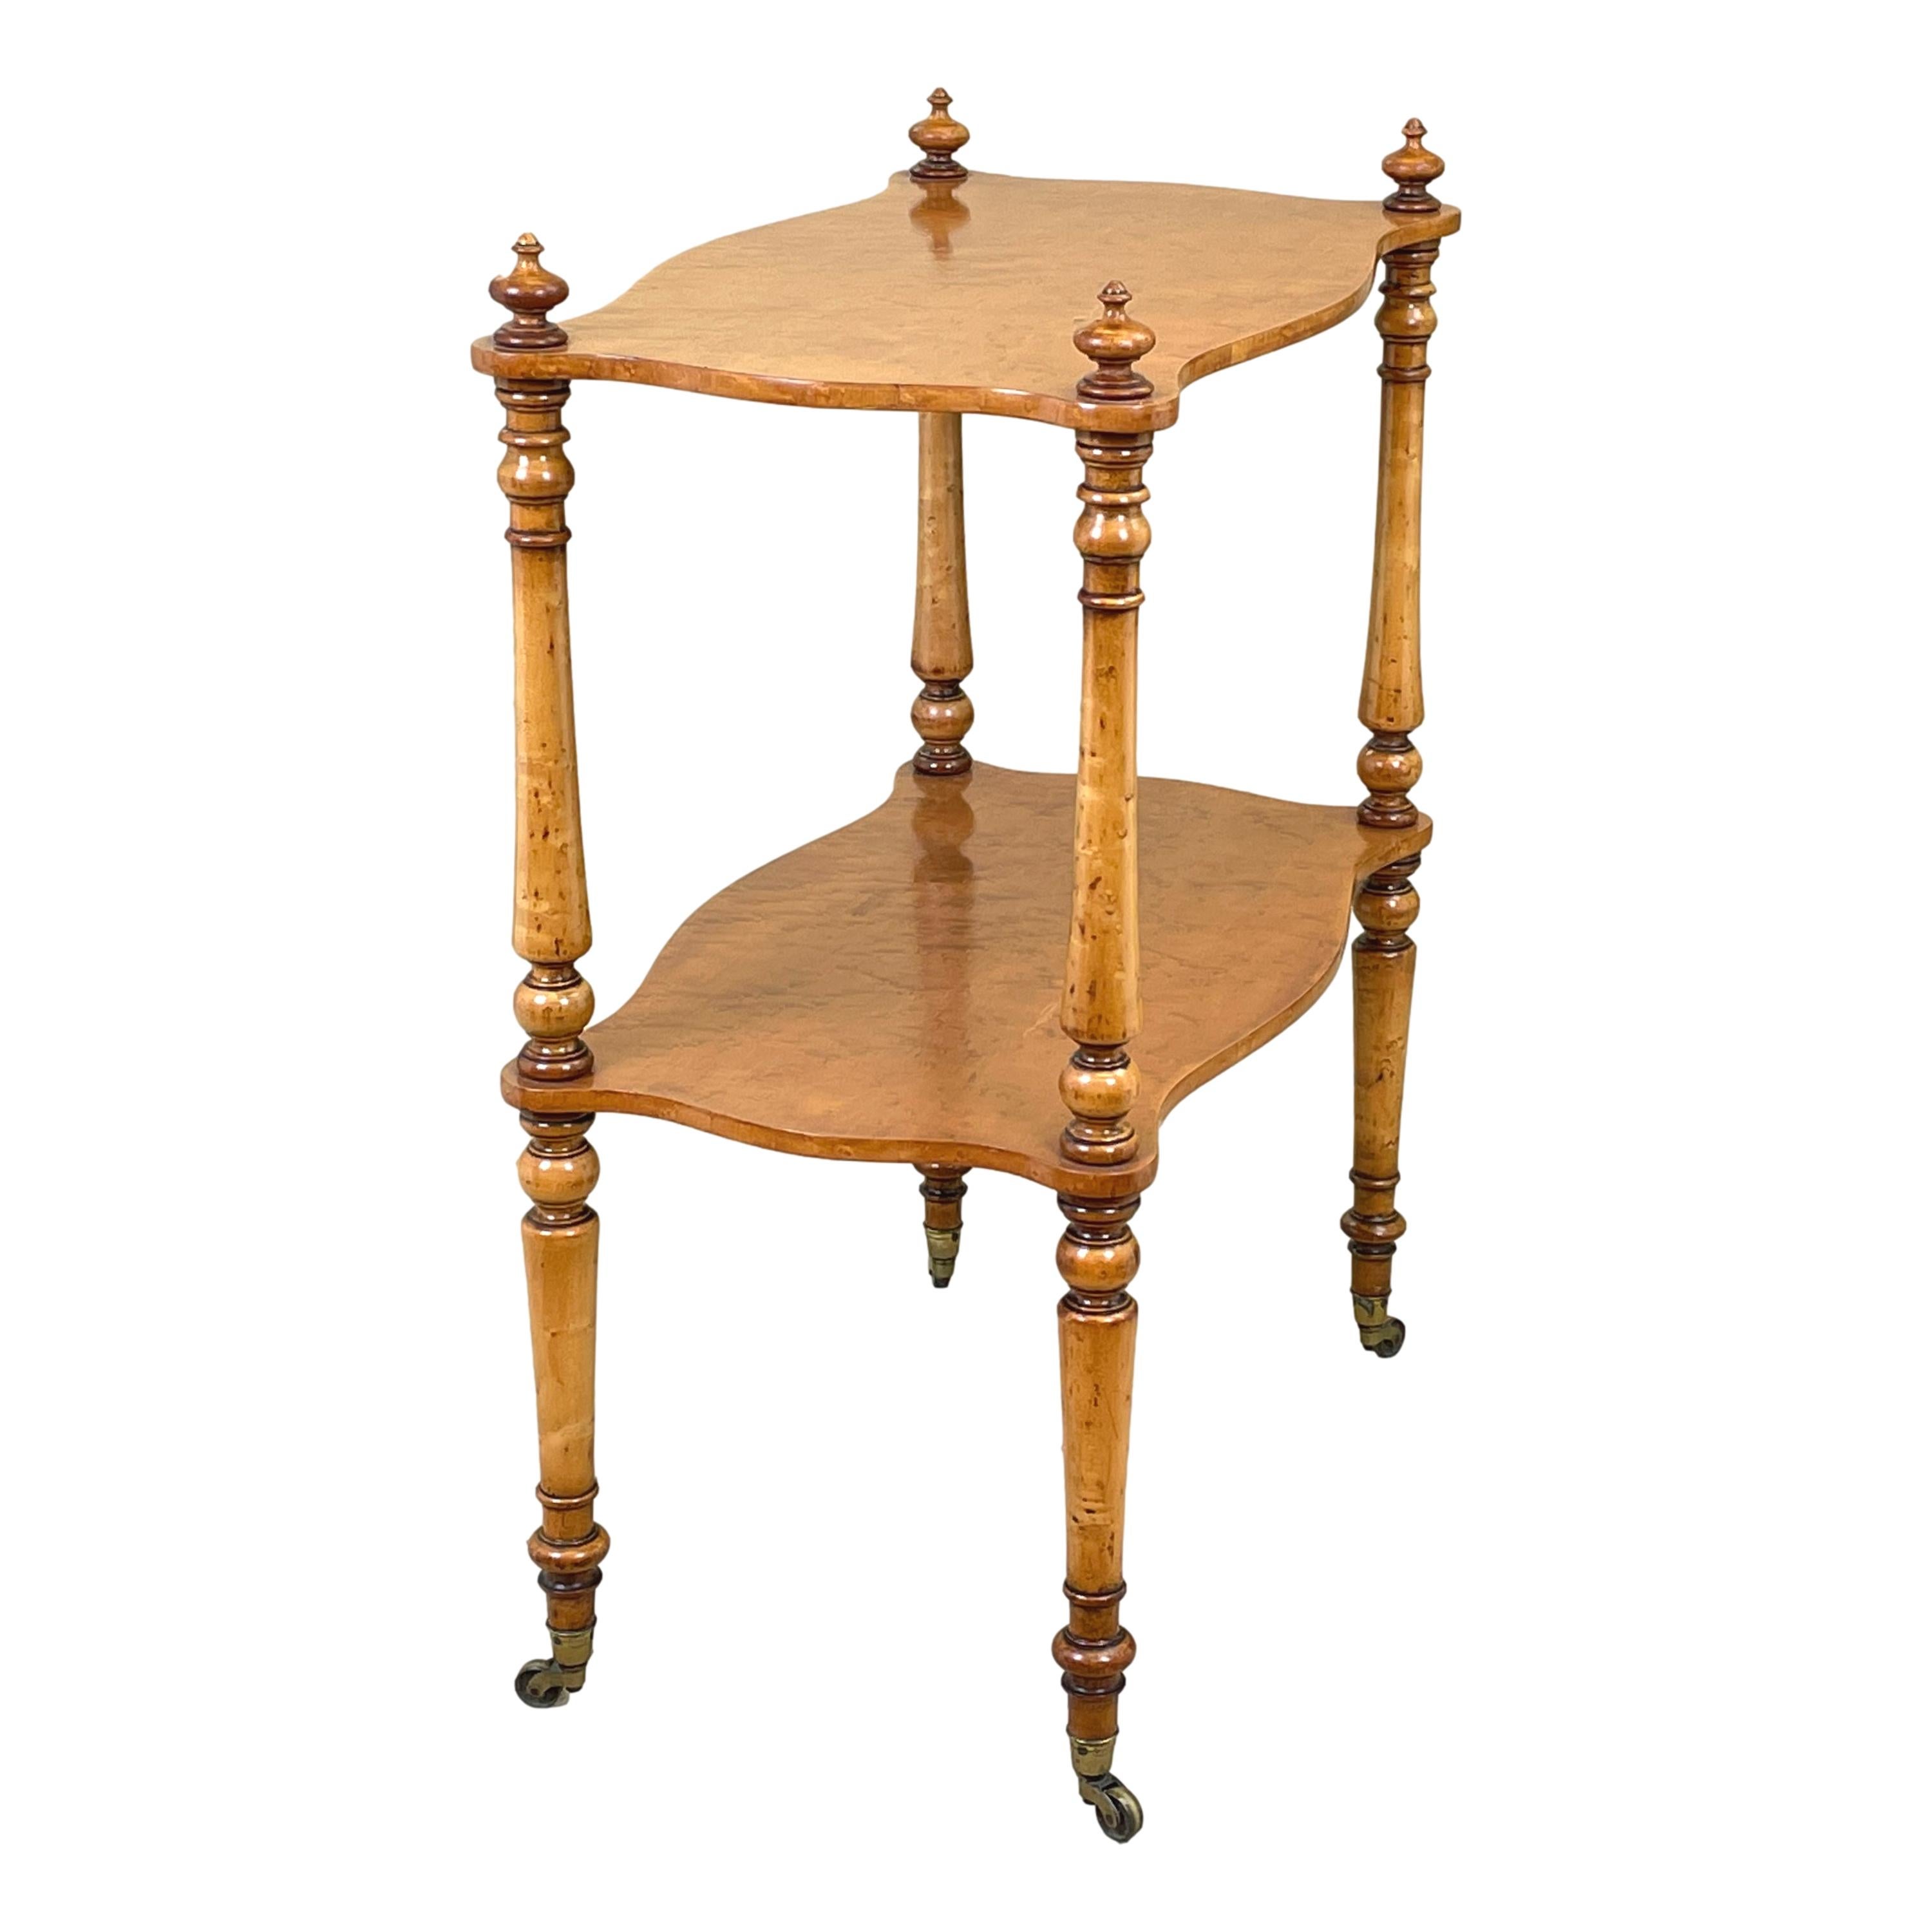 A charming mid 19th century English birds eye
maple wood English étagère, or whatnot, having
two well figured shaped tiers united by elegant
turned upright supports terminating on
original brass castors

(This fabulous quality and useful piece